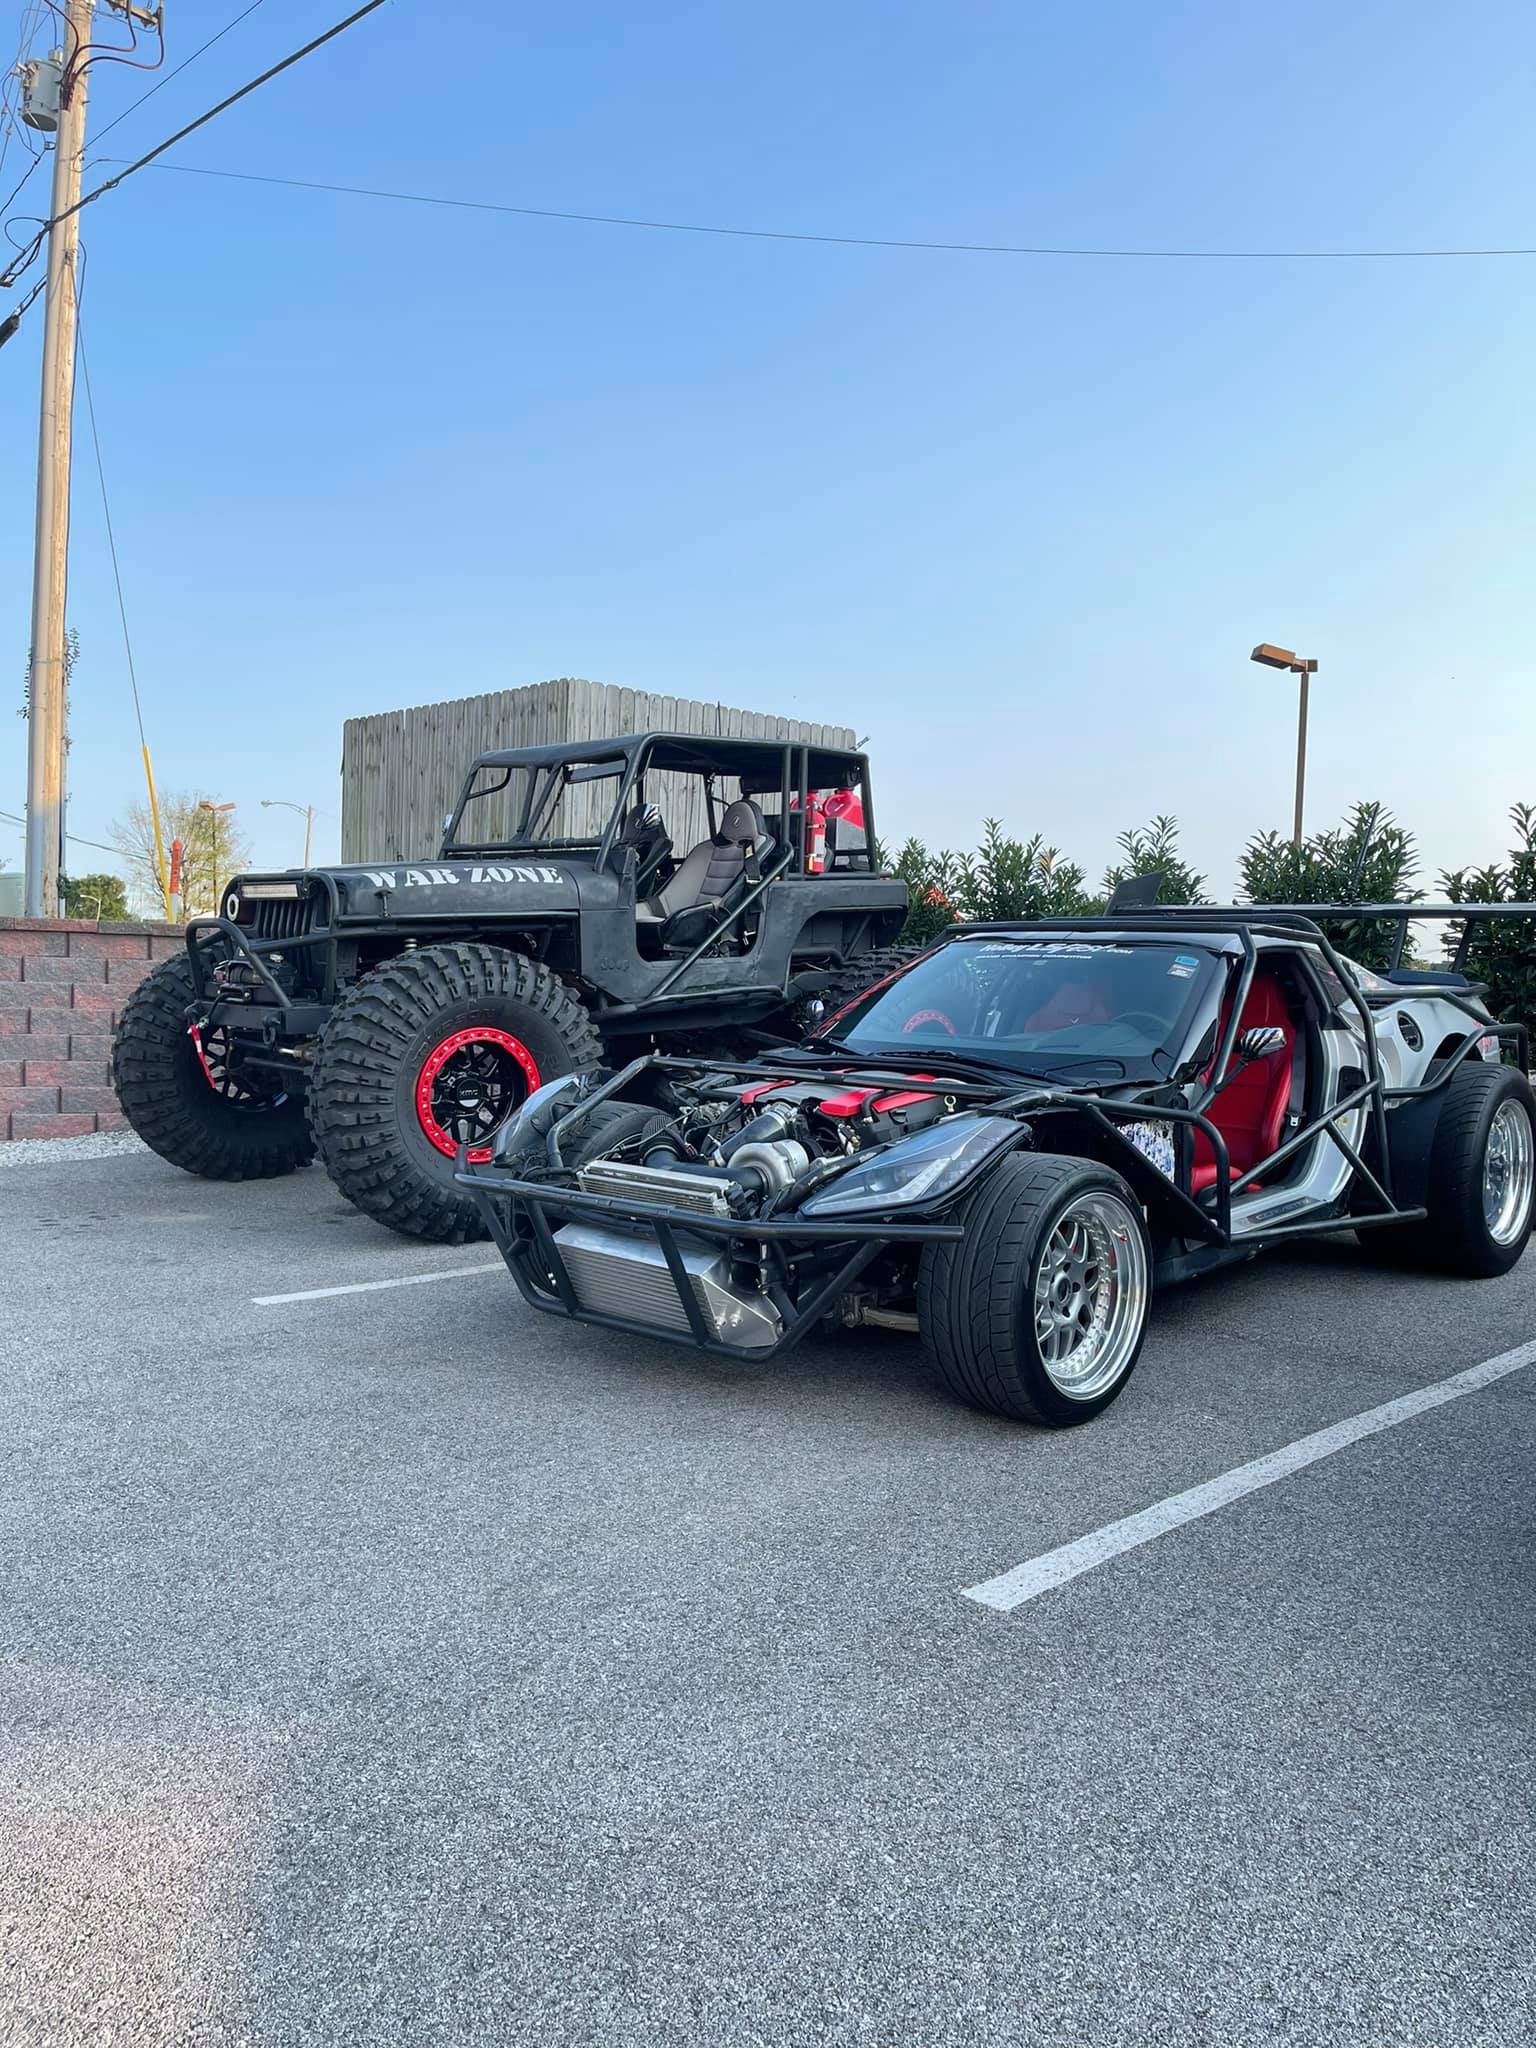 Mike Mahdi's "Mad Max" Stingray parked next to another of his amazing transformations. Clearly, this guy believes in subtlety!